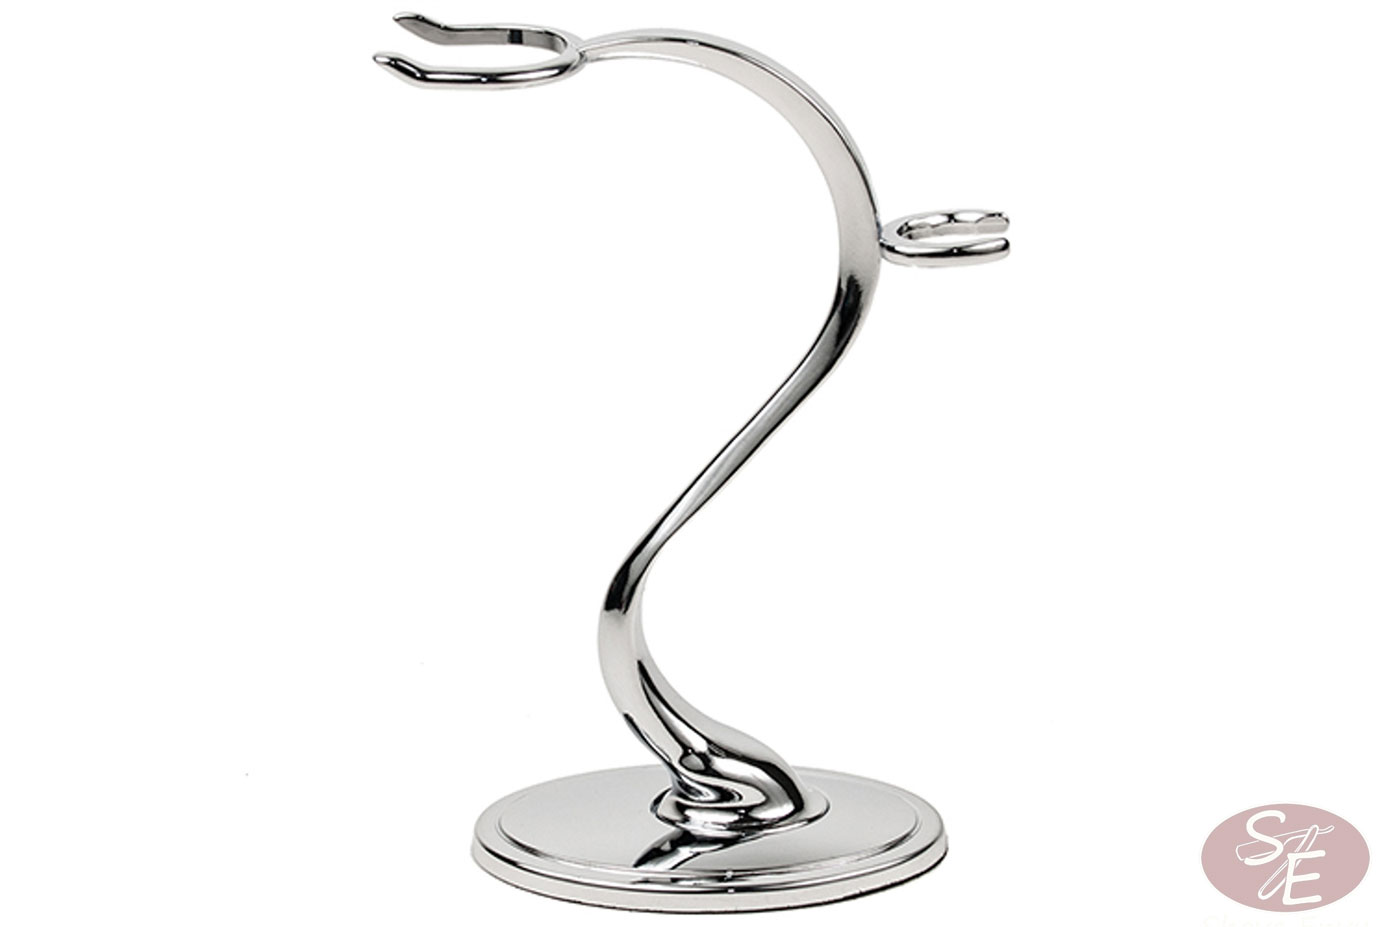 Deluxe Heavyweight Safety Razor and Shaving Brush Stand (USS4) - High Luster Chrome